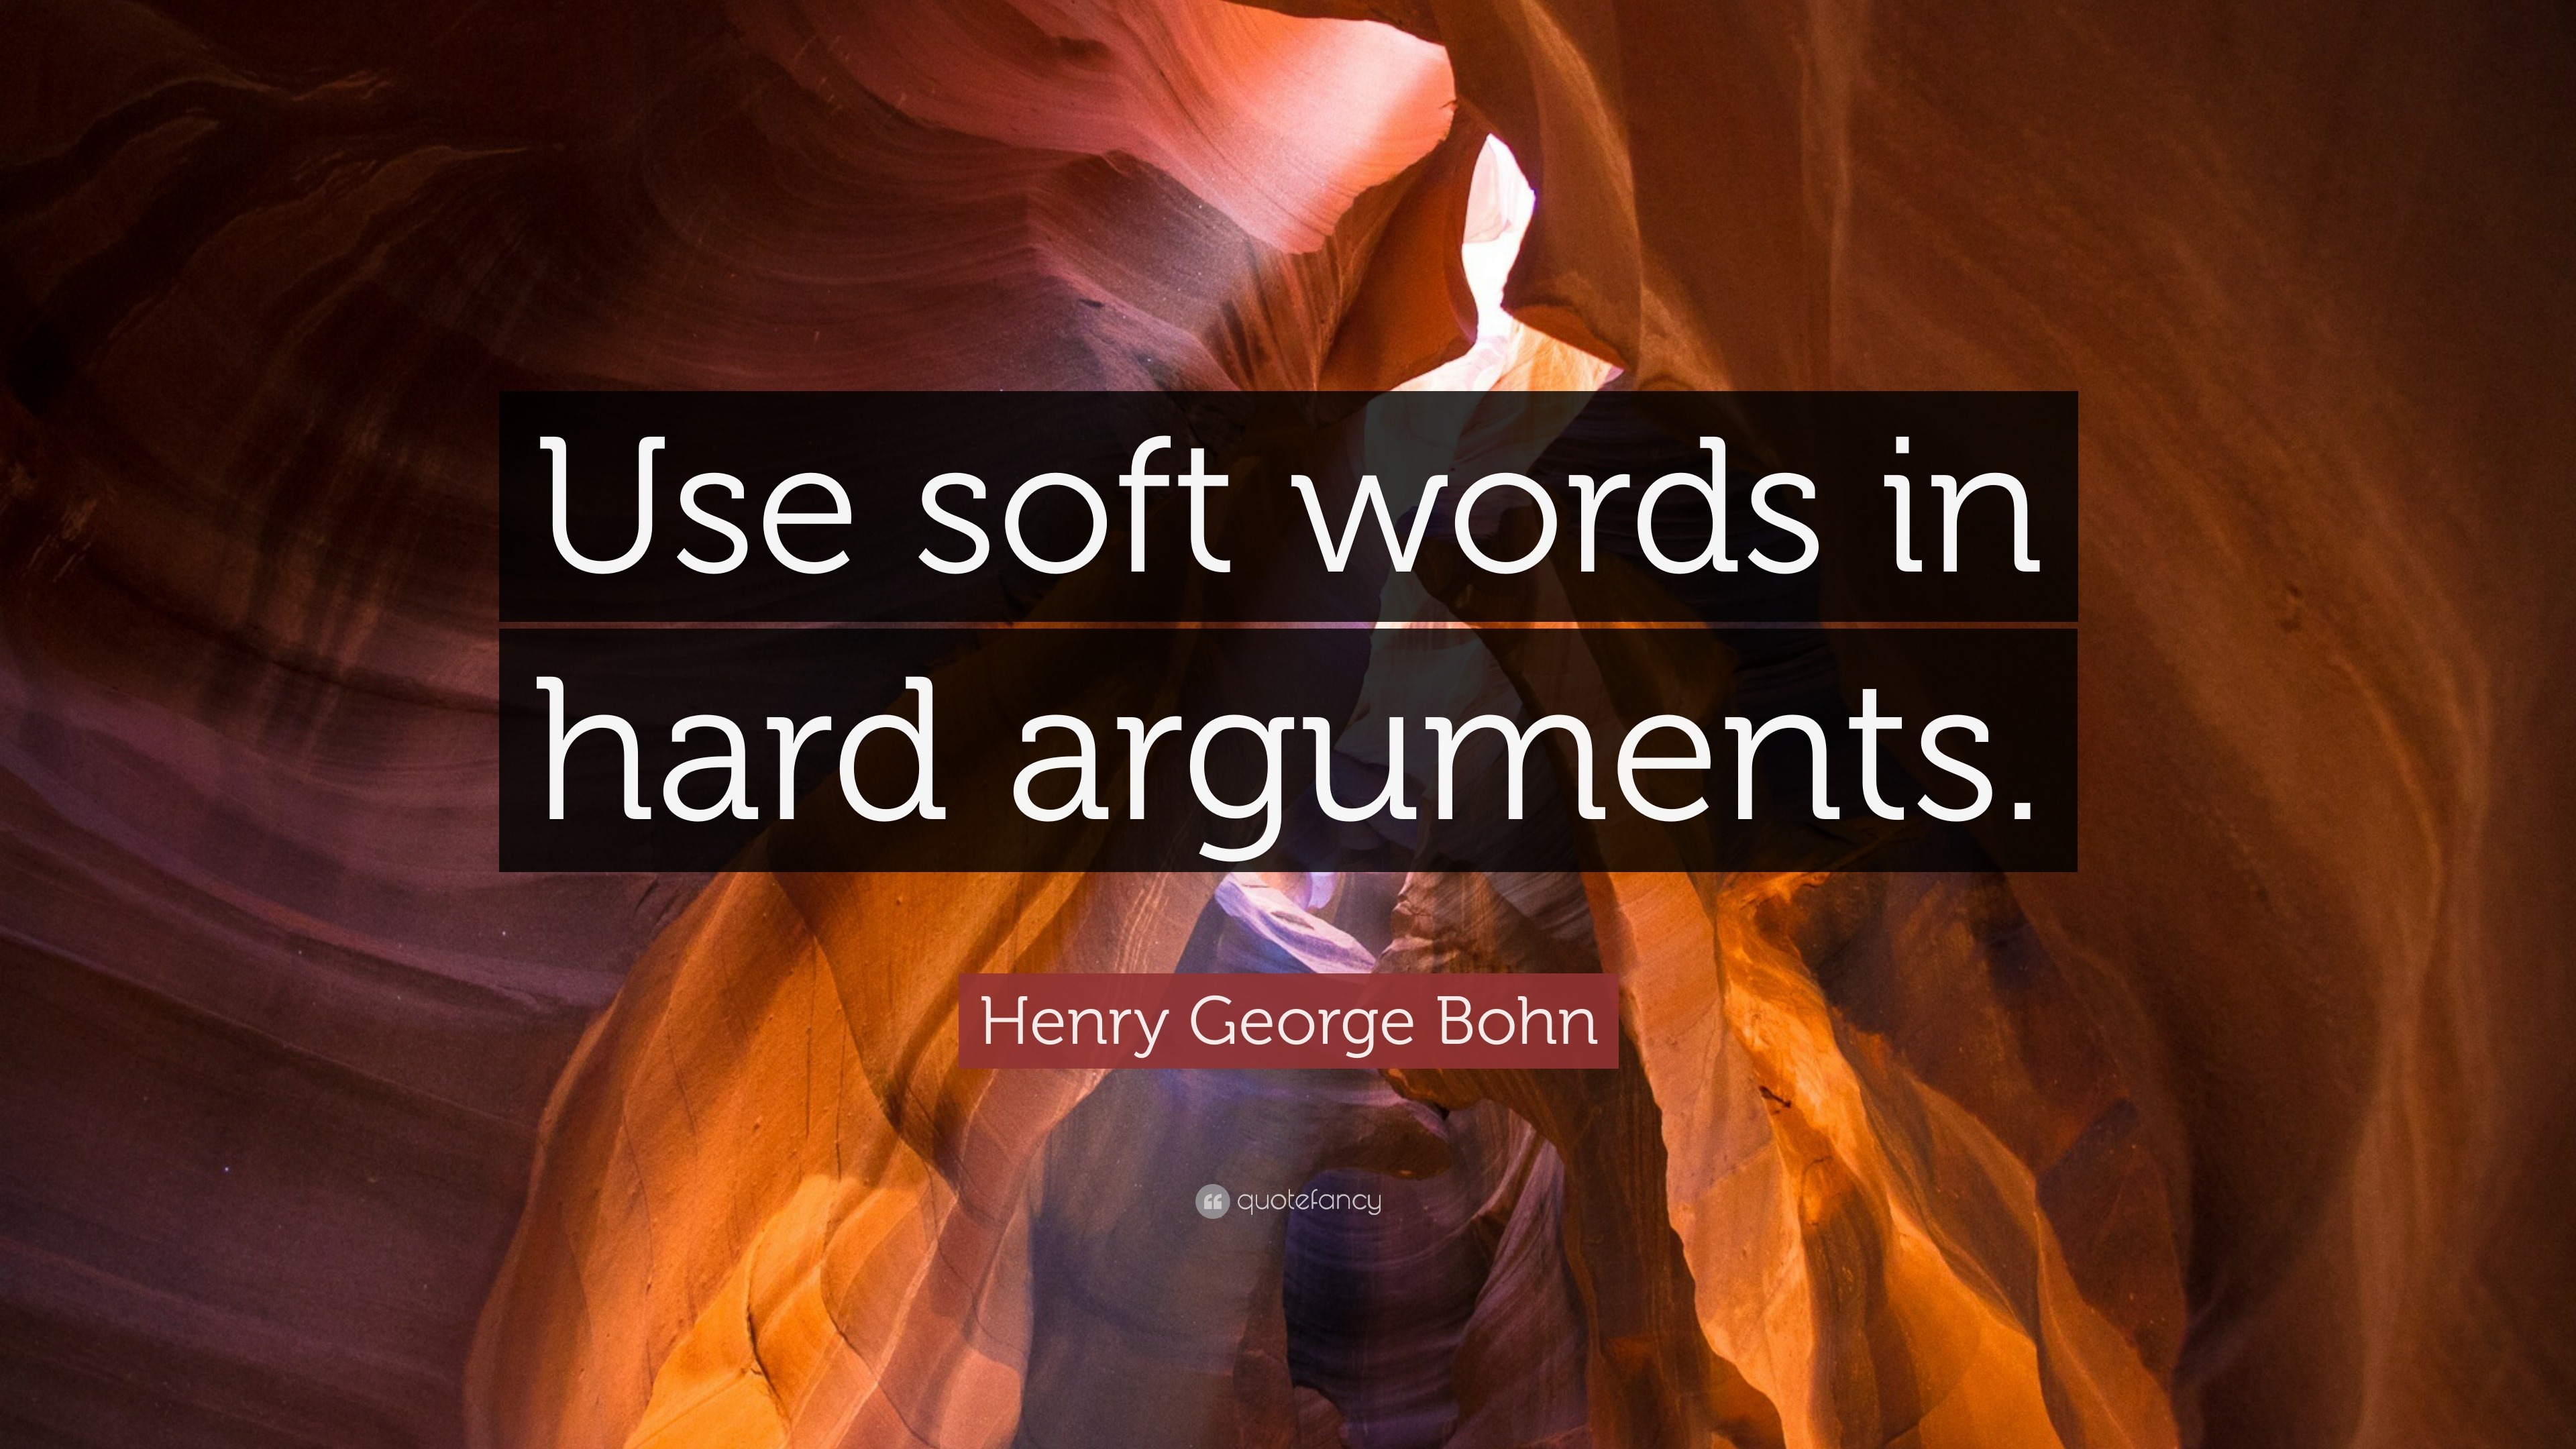 henry-george-bohn-quote-use-soft-words-in-hard-arguments